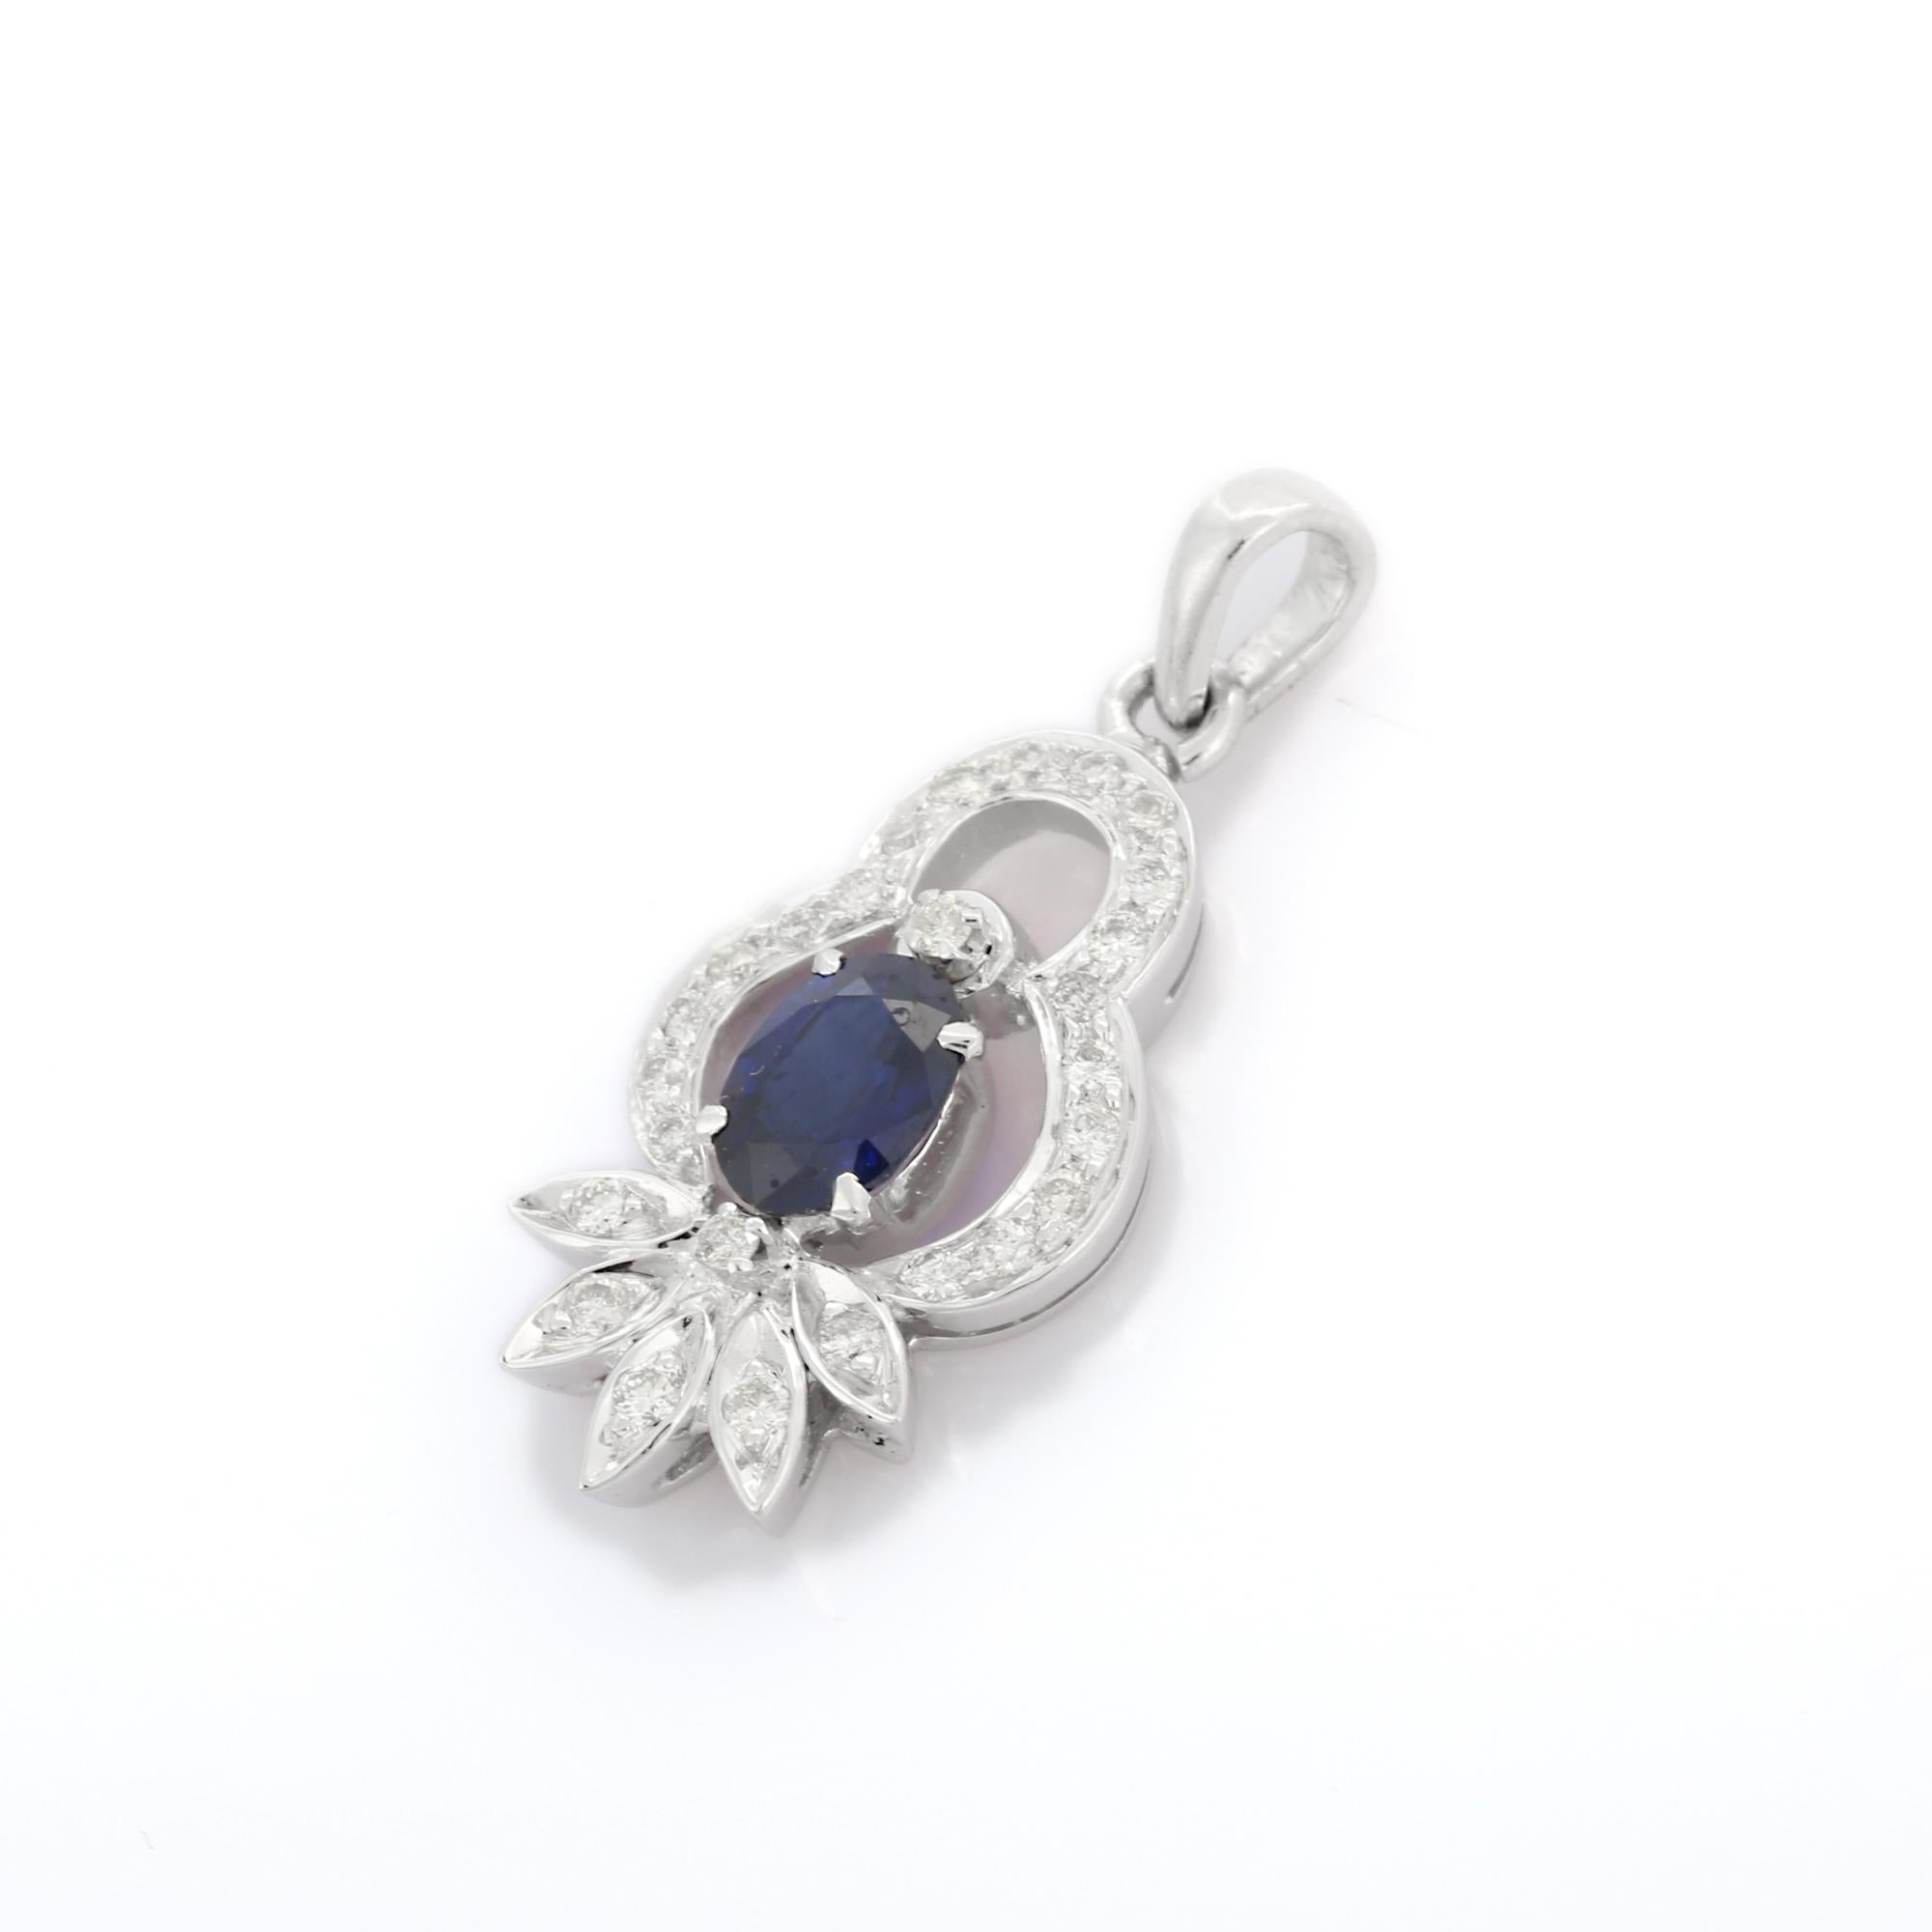 Blue Sapphire pendant in 18K Gold. It has a oval cut sapphire studded with diamonds that completes your look with a decent touch. Pendants are used to wear or gifted to represent love and promises. It's an attractive jewelry piece that goes with